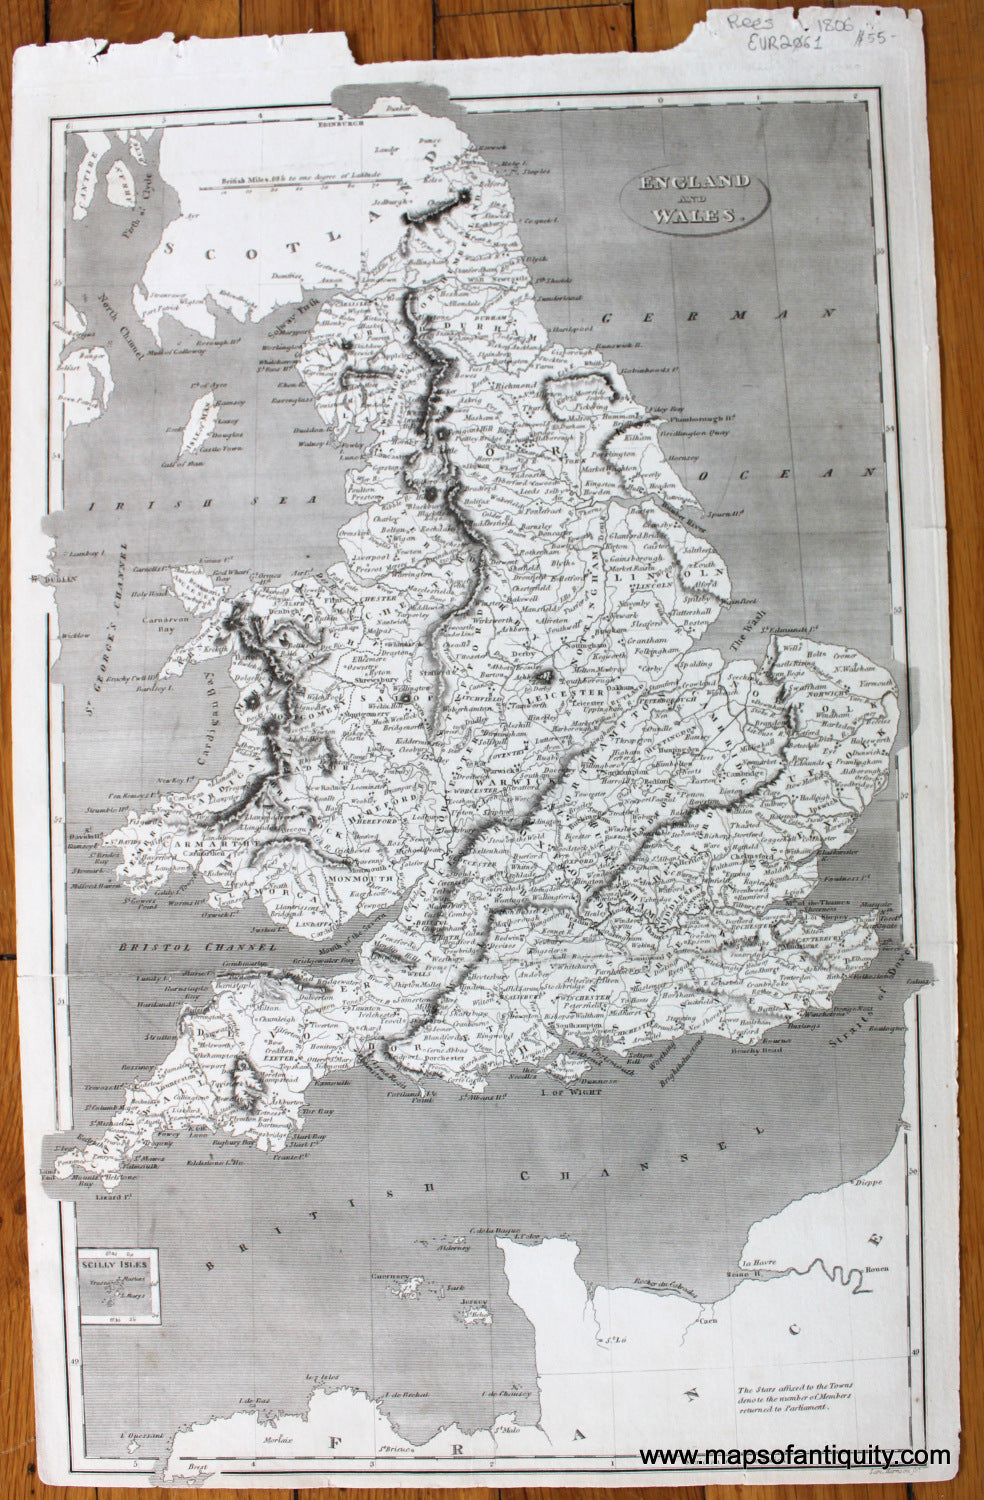 Antique-Black-and-White-Map-England-and-Wales-Europe-England-1806-Rees-Maps-Of-Antiquity